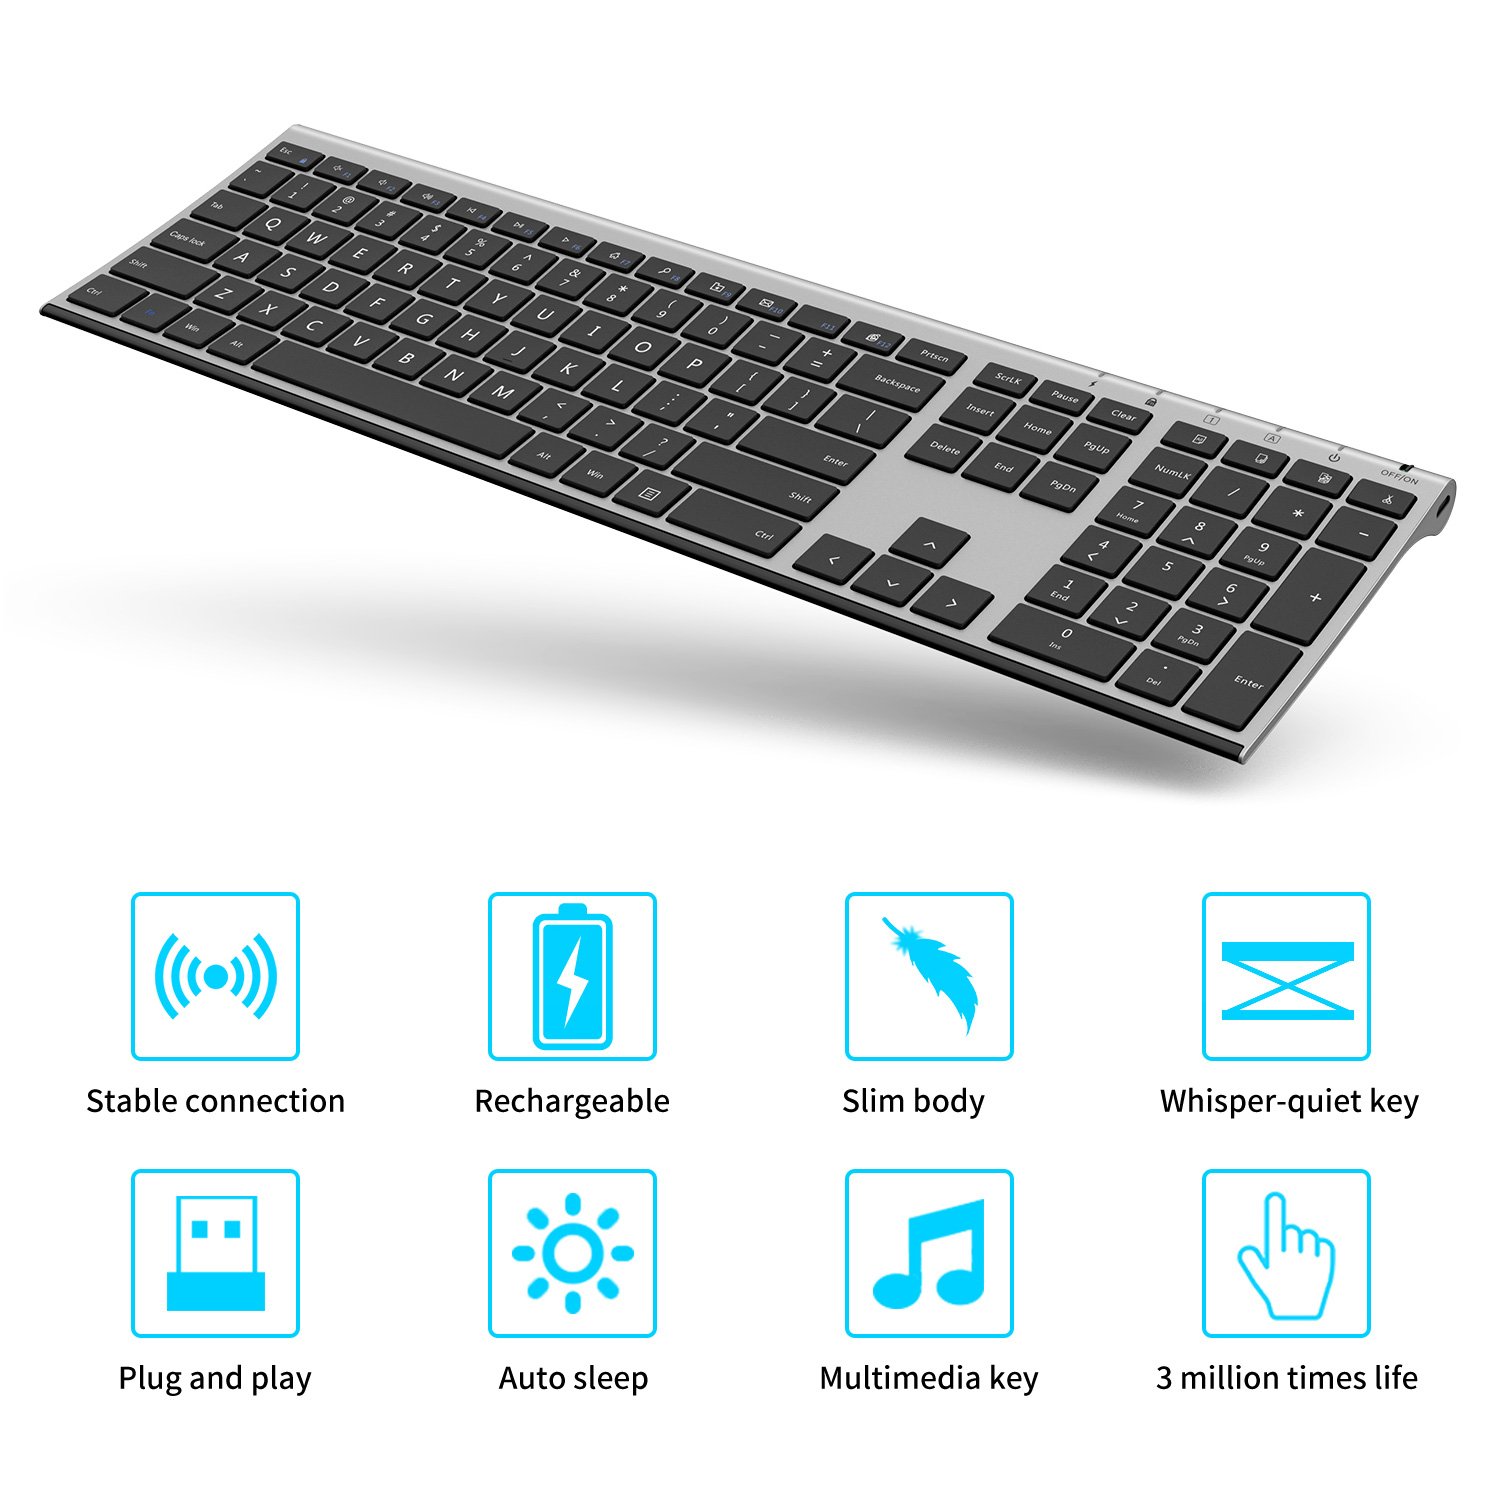 Wireless Keyboard and Mouse, Vssoplor 2.4GHz Rechargeable Compact Quiet Full-Size Keyboard and Mouse Combo with Nano USB Receiver for Windows, Laptop, PC, Notebook-Dark Gray